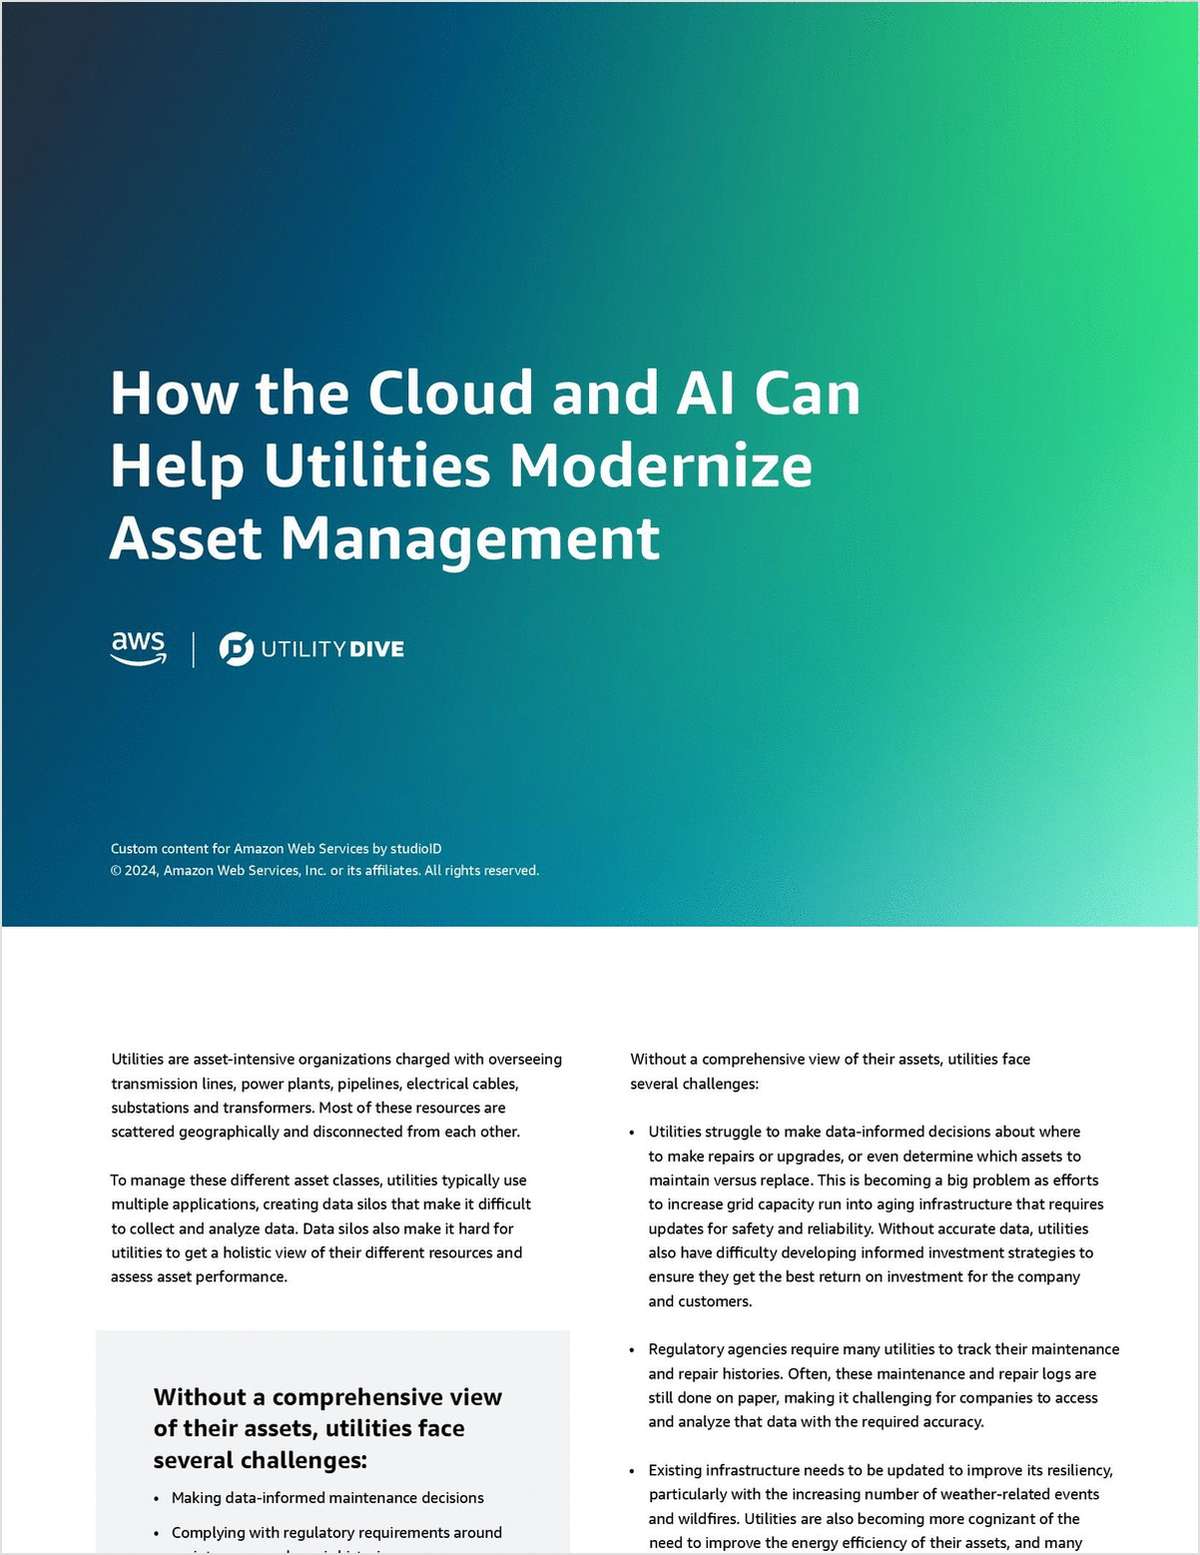 How the Cloud and AI Can Help Utilities Modernize Asset Management